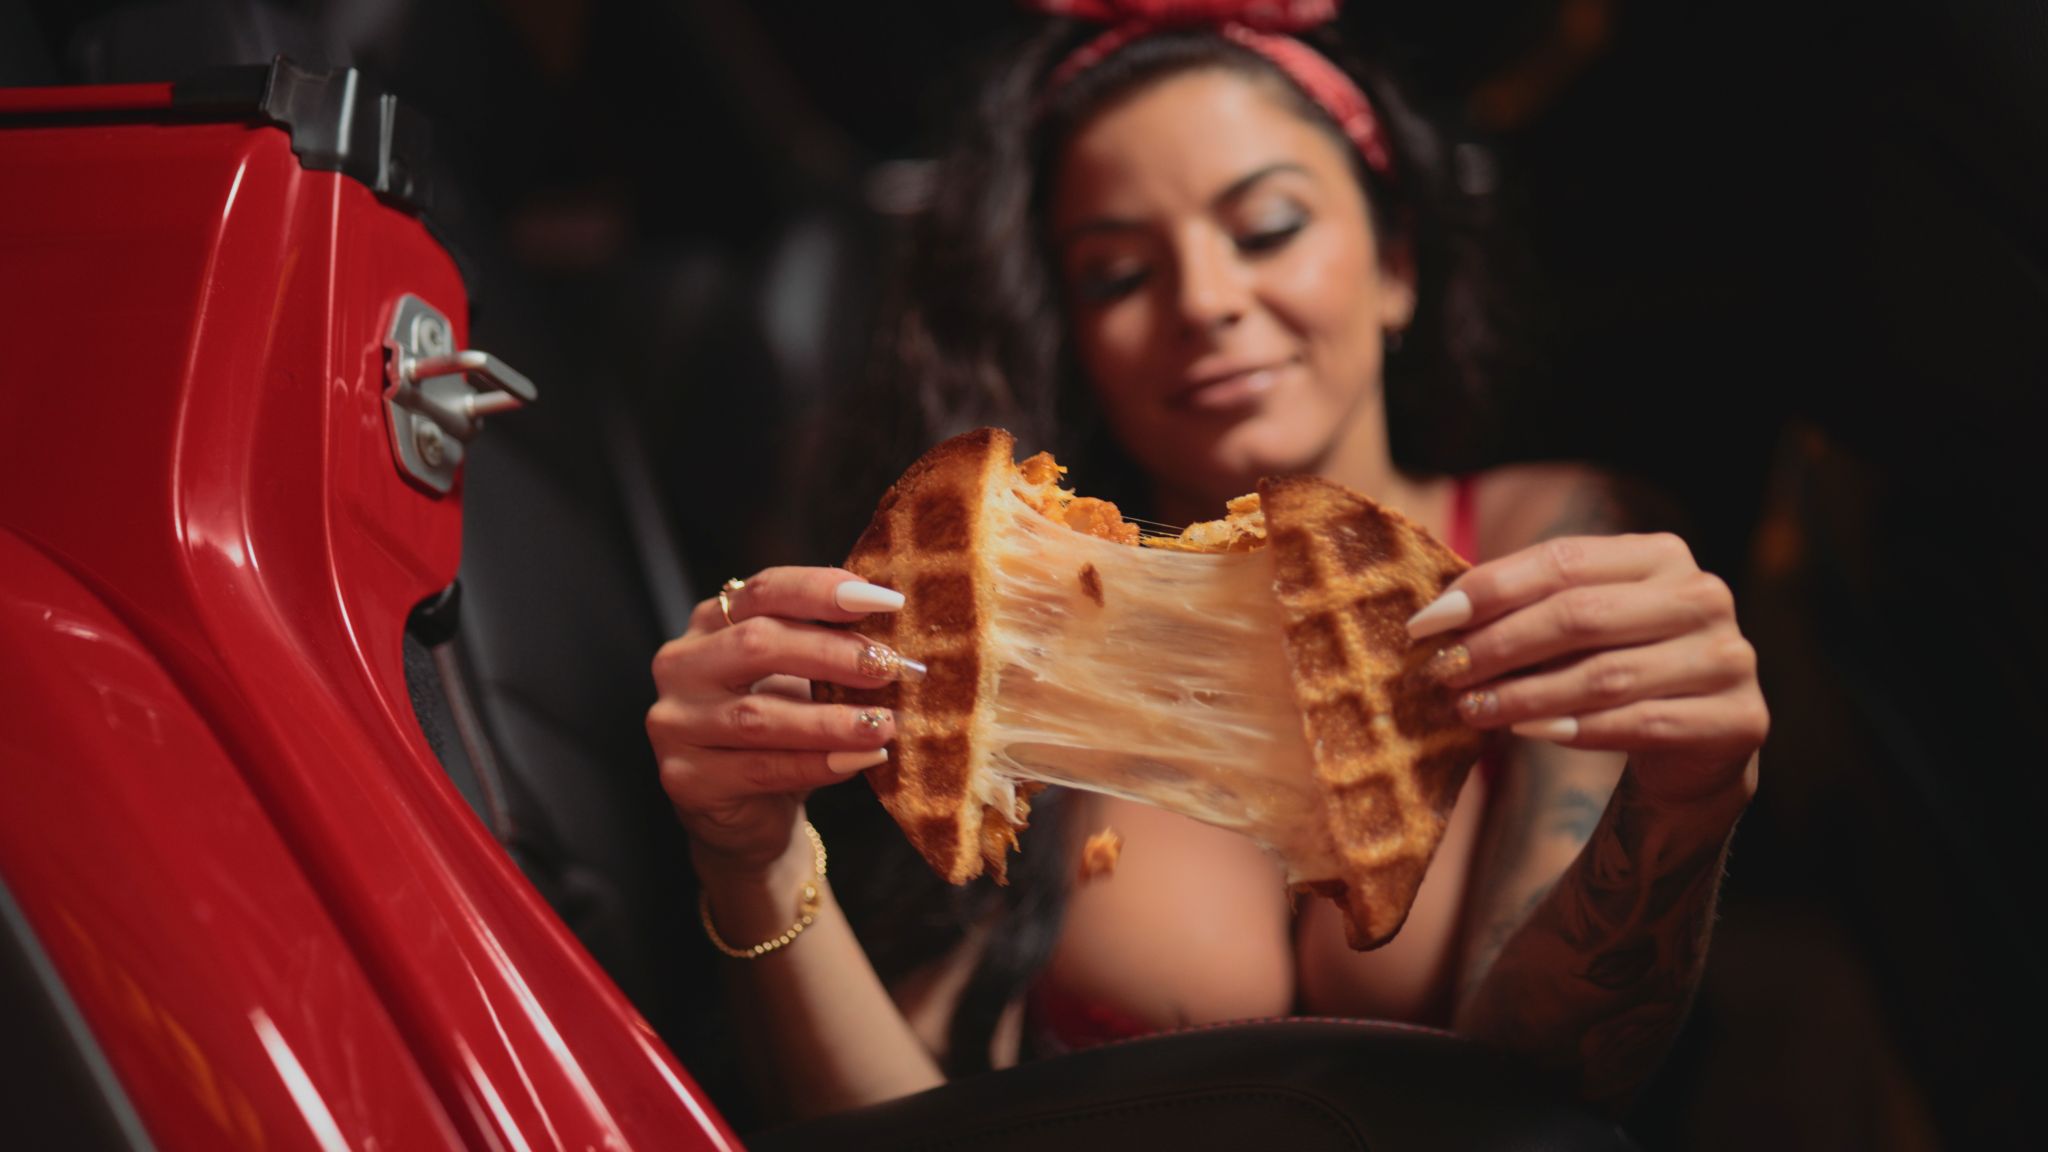 Woman with long brown hair spreading a grilled cheese sandwich she is holding in front of her